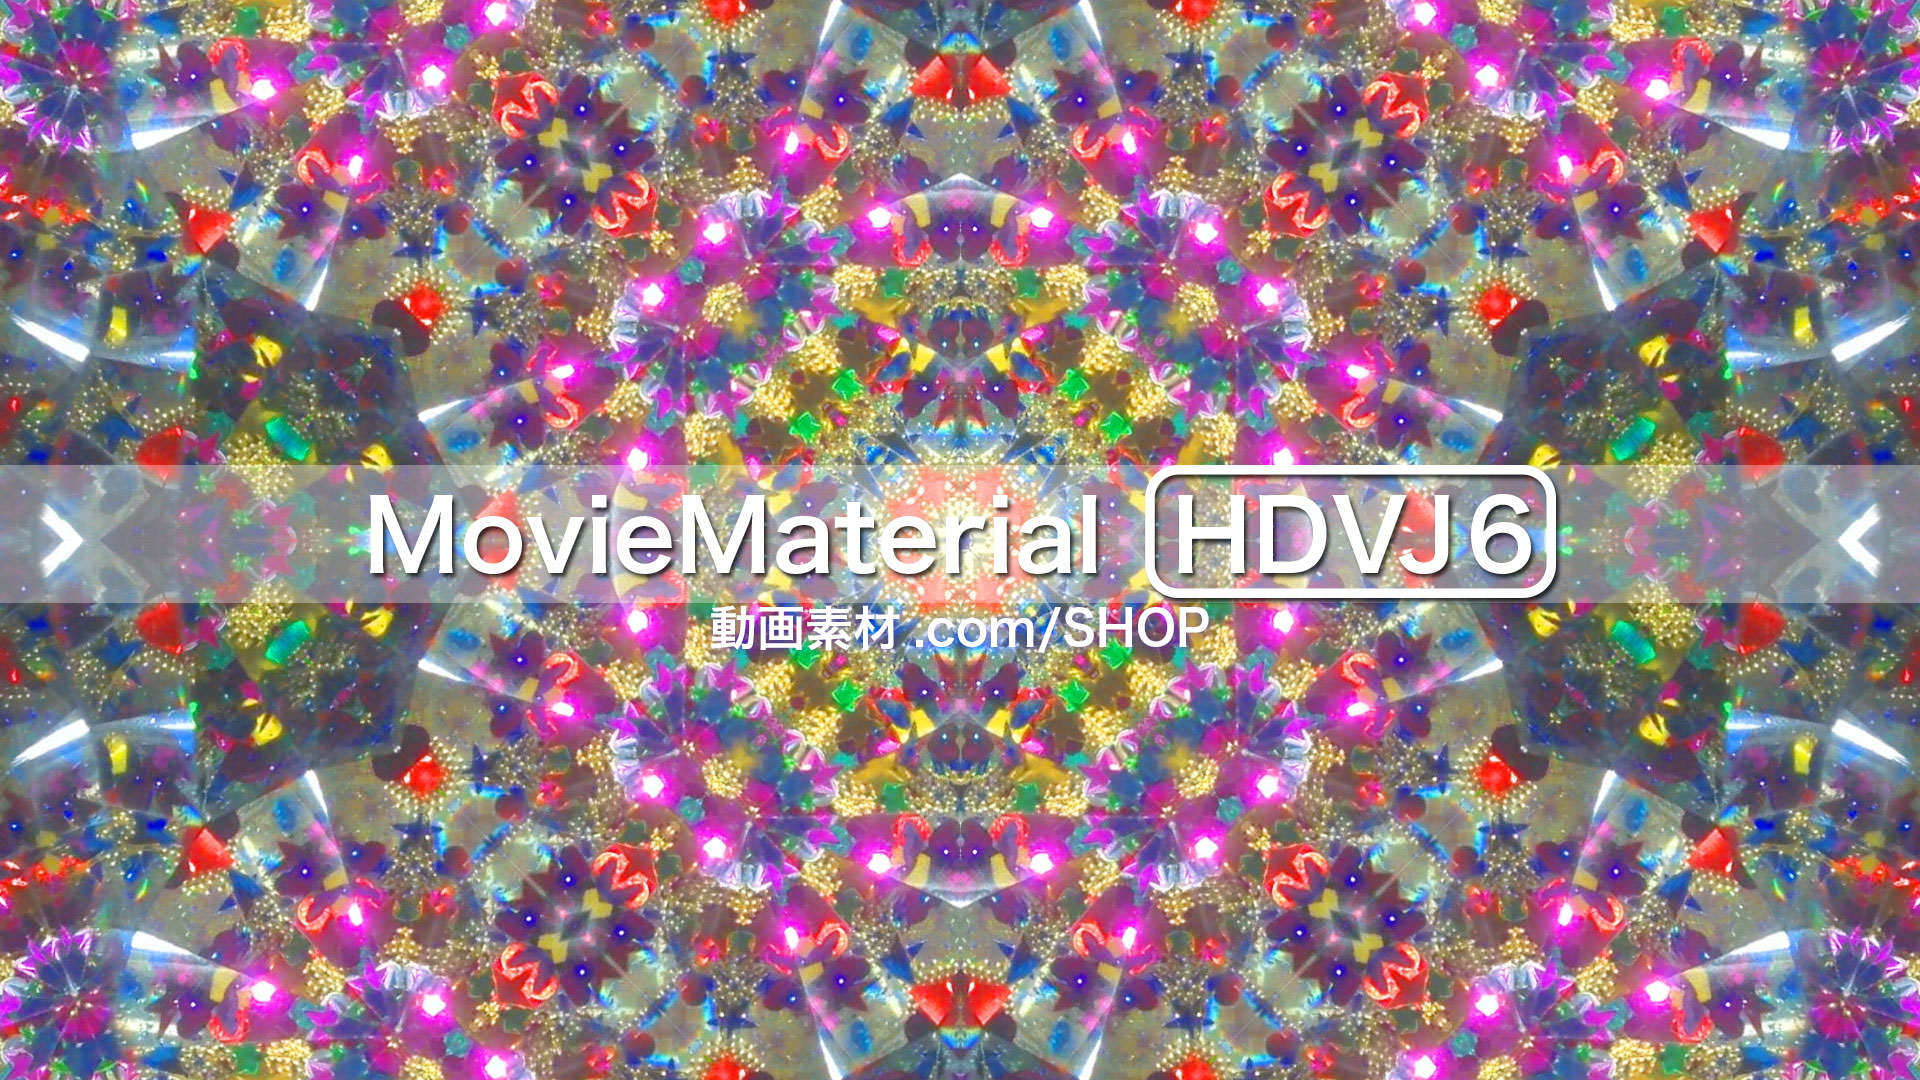 【MovieMaterial HDVJ6】フルハイビジョン動画素材集21